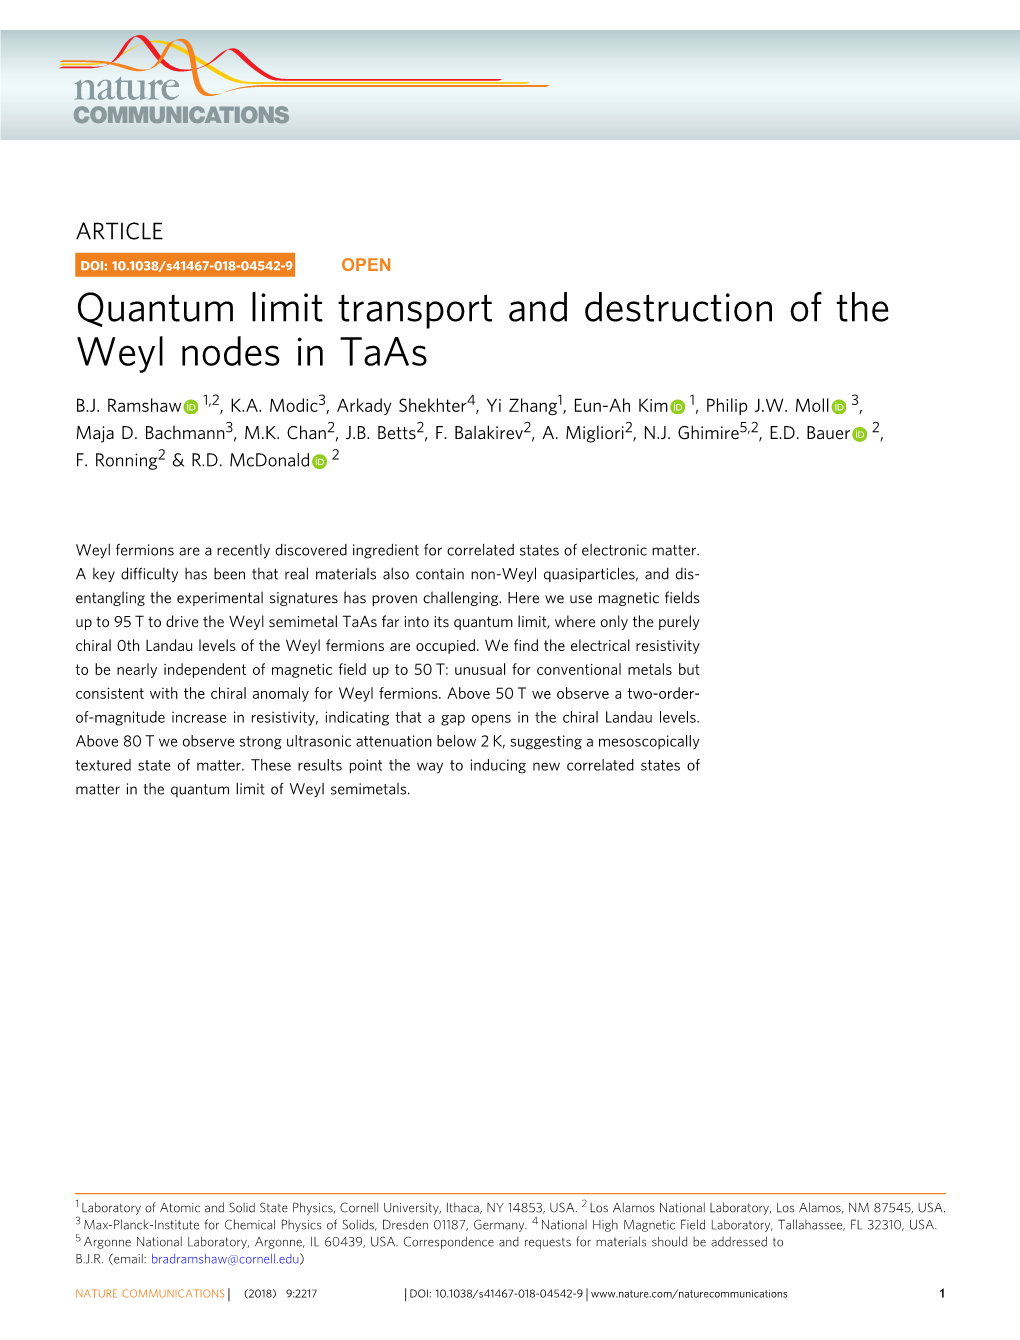 Quantum Limit Transport and Destruction of the Weyl Nodes in Taas